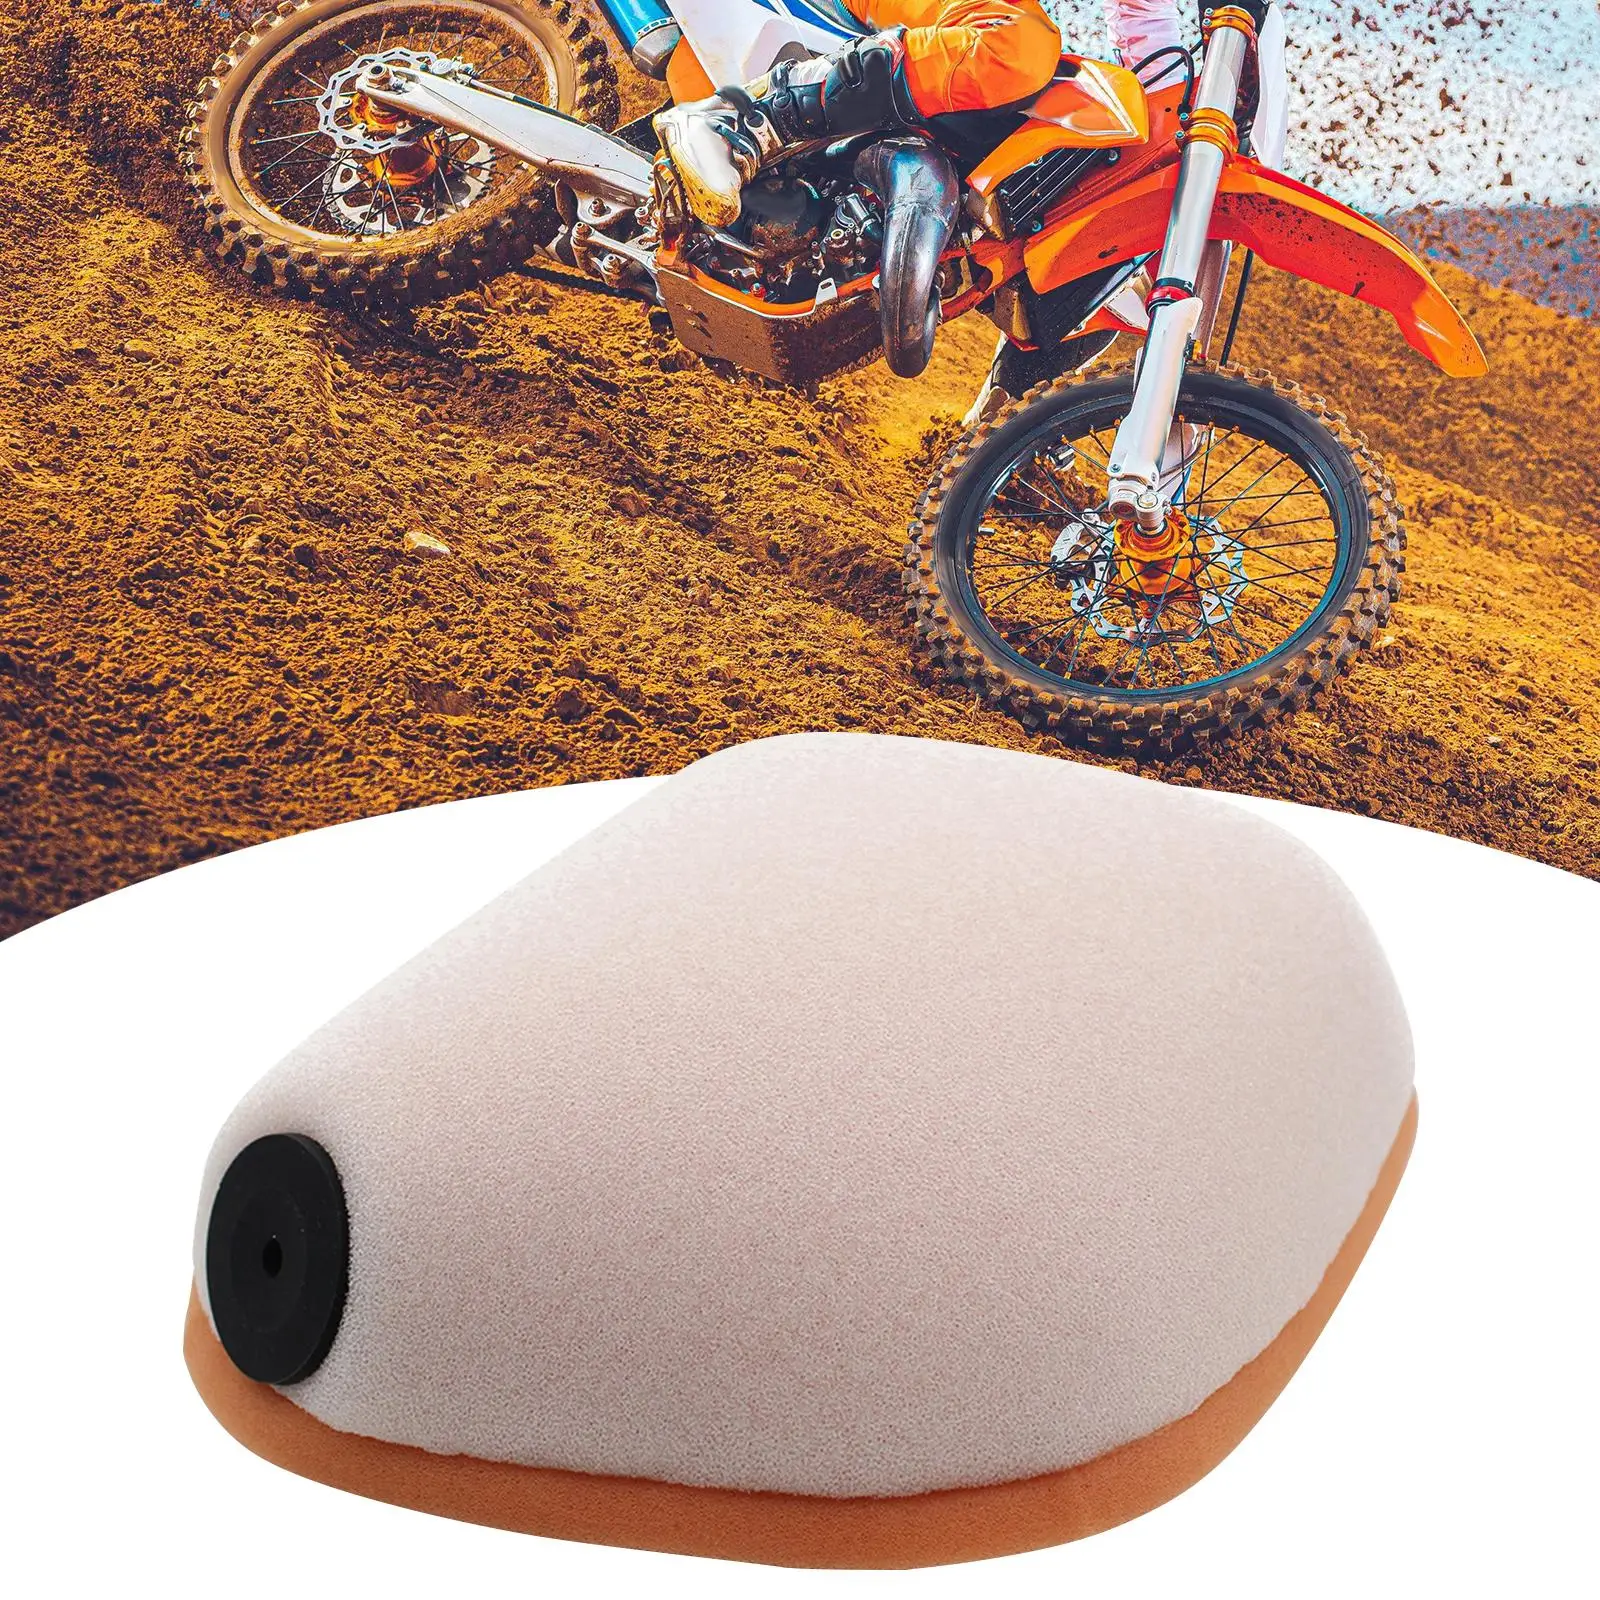 Sturdy foam Filter Professional Motorcross Air Intake Cleaner for SX/Sxf125 350 250 Direct Replaces Spare Parts